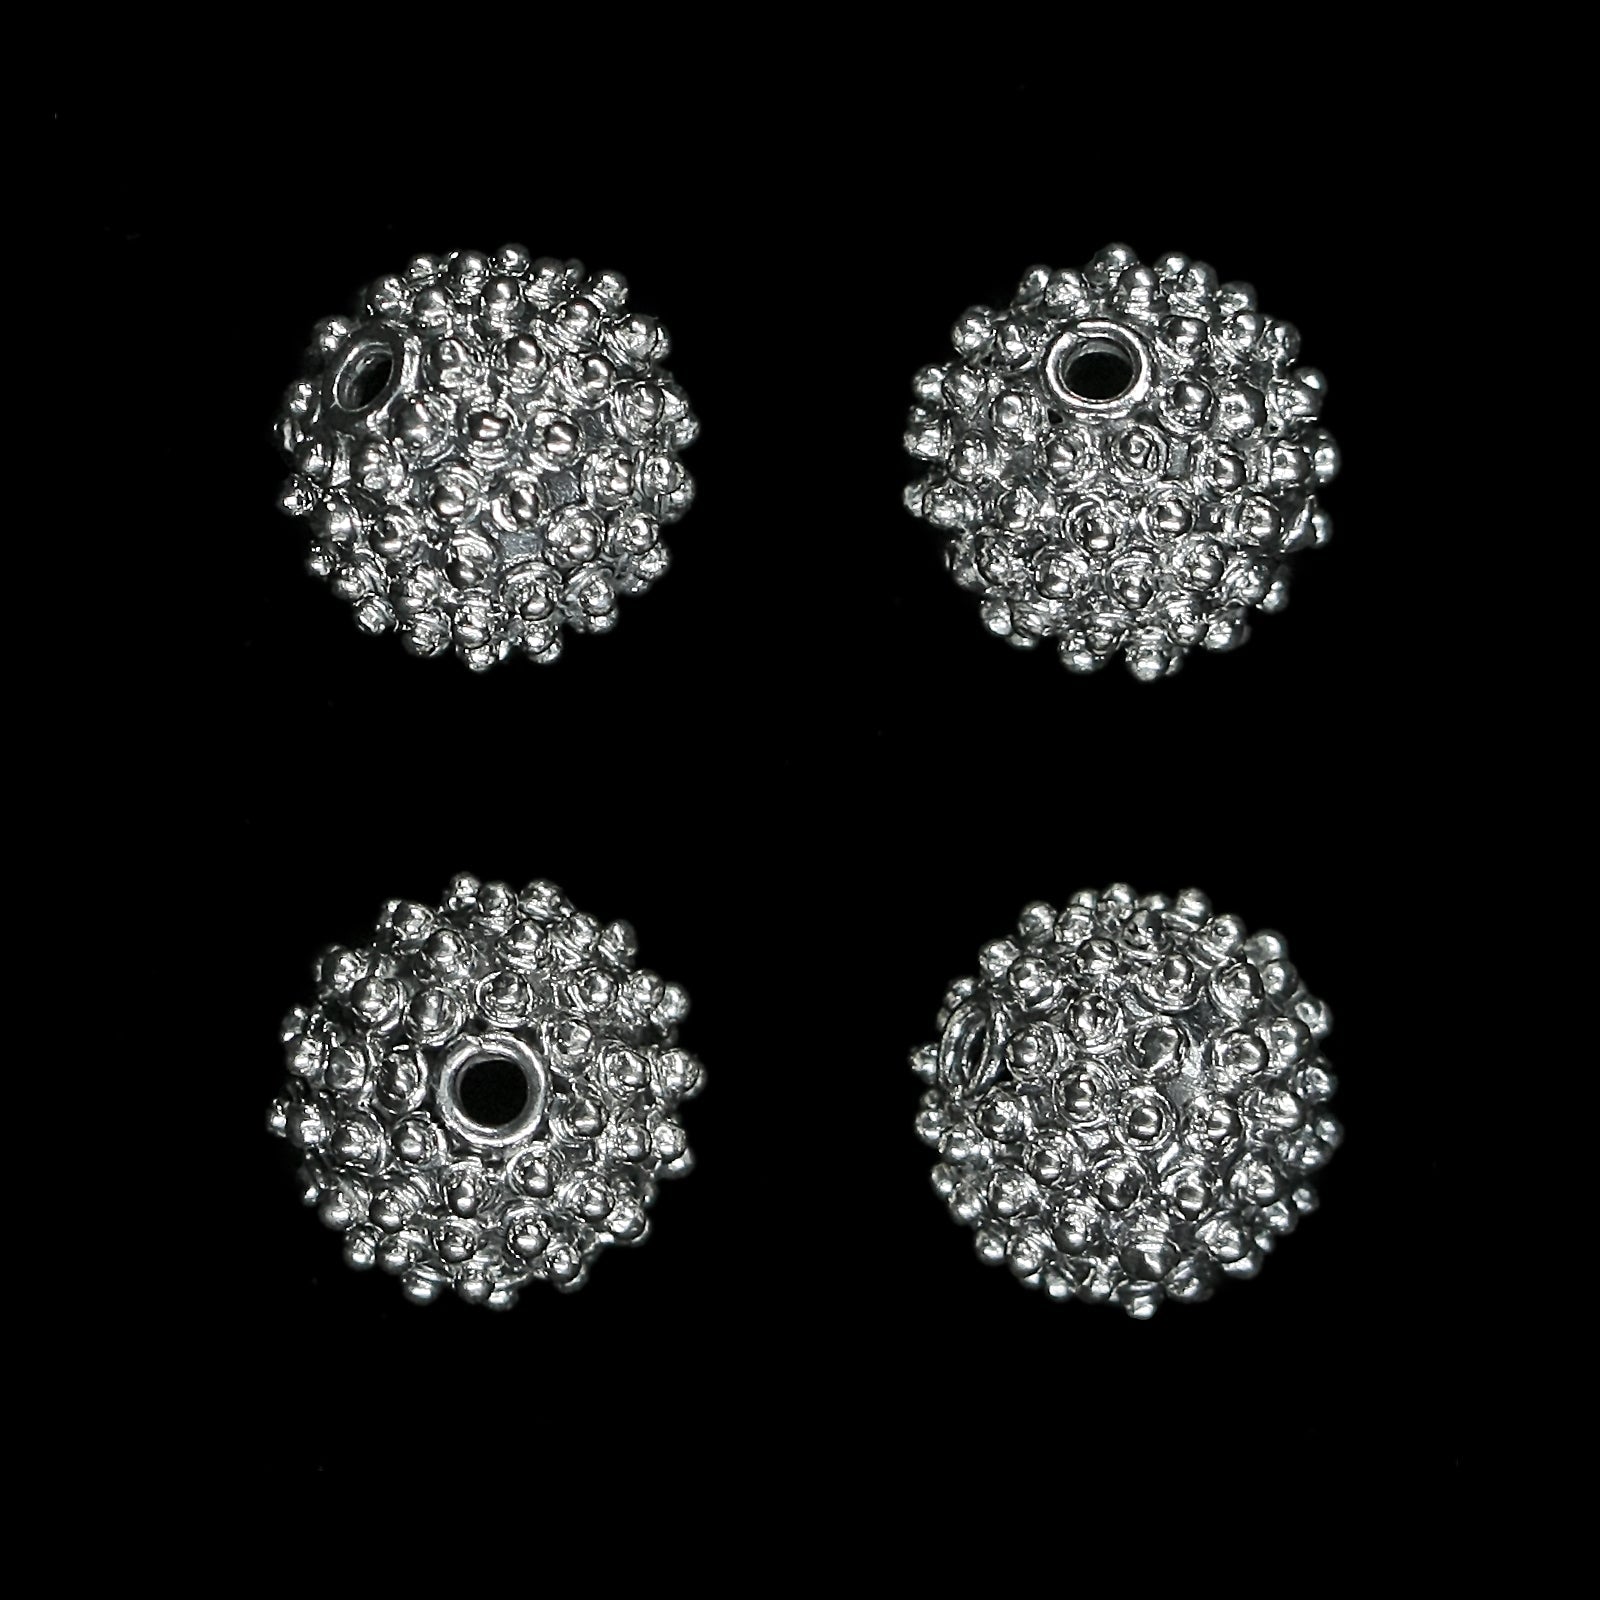 Silver Viking Beads from Visby - Knobbly